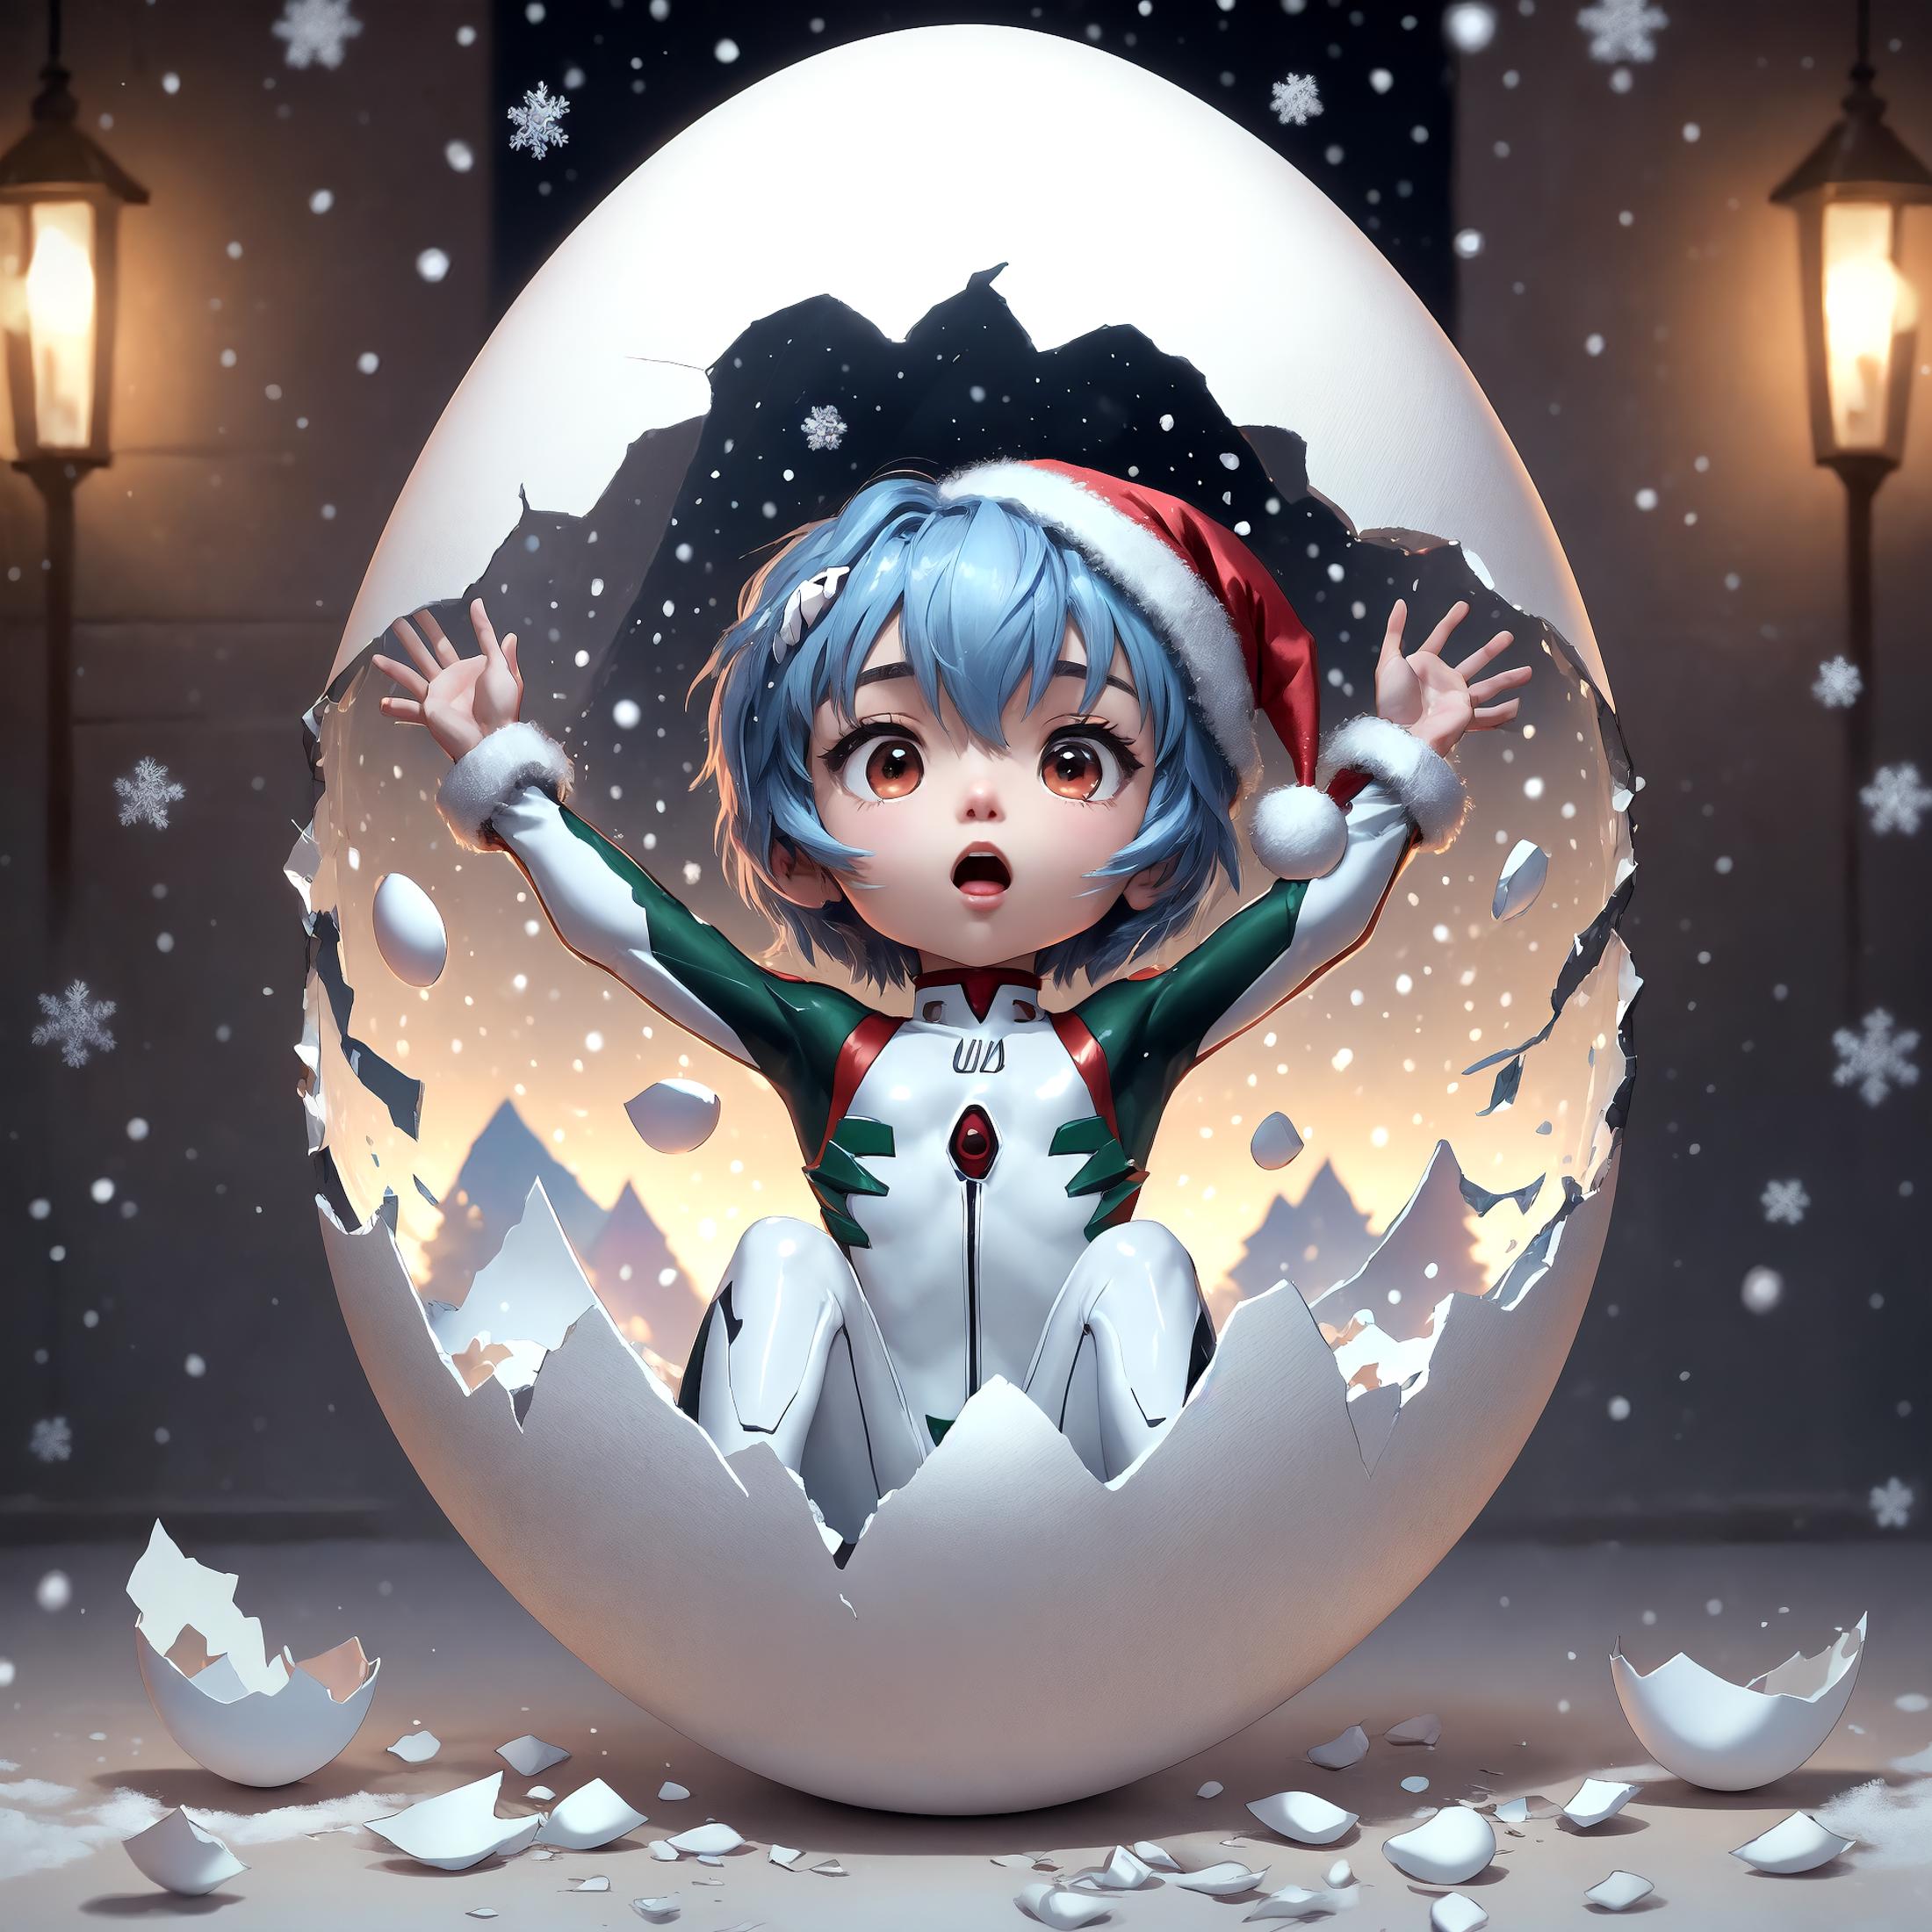 Hatching from Egg (concept) image by Marader